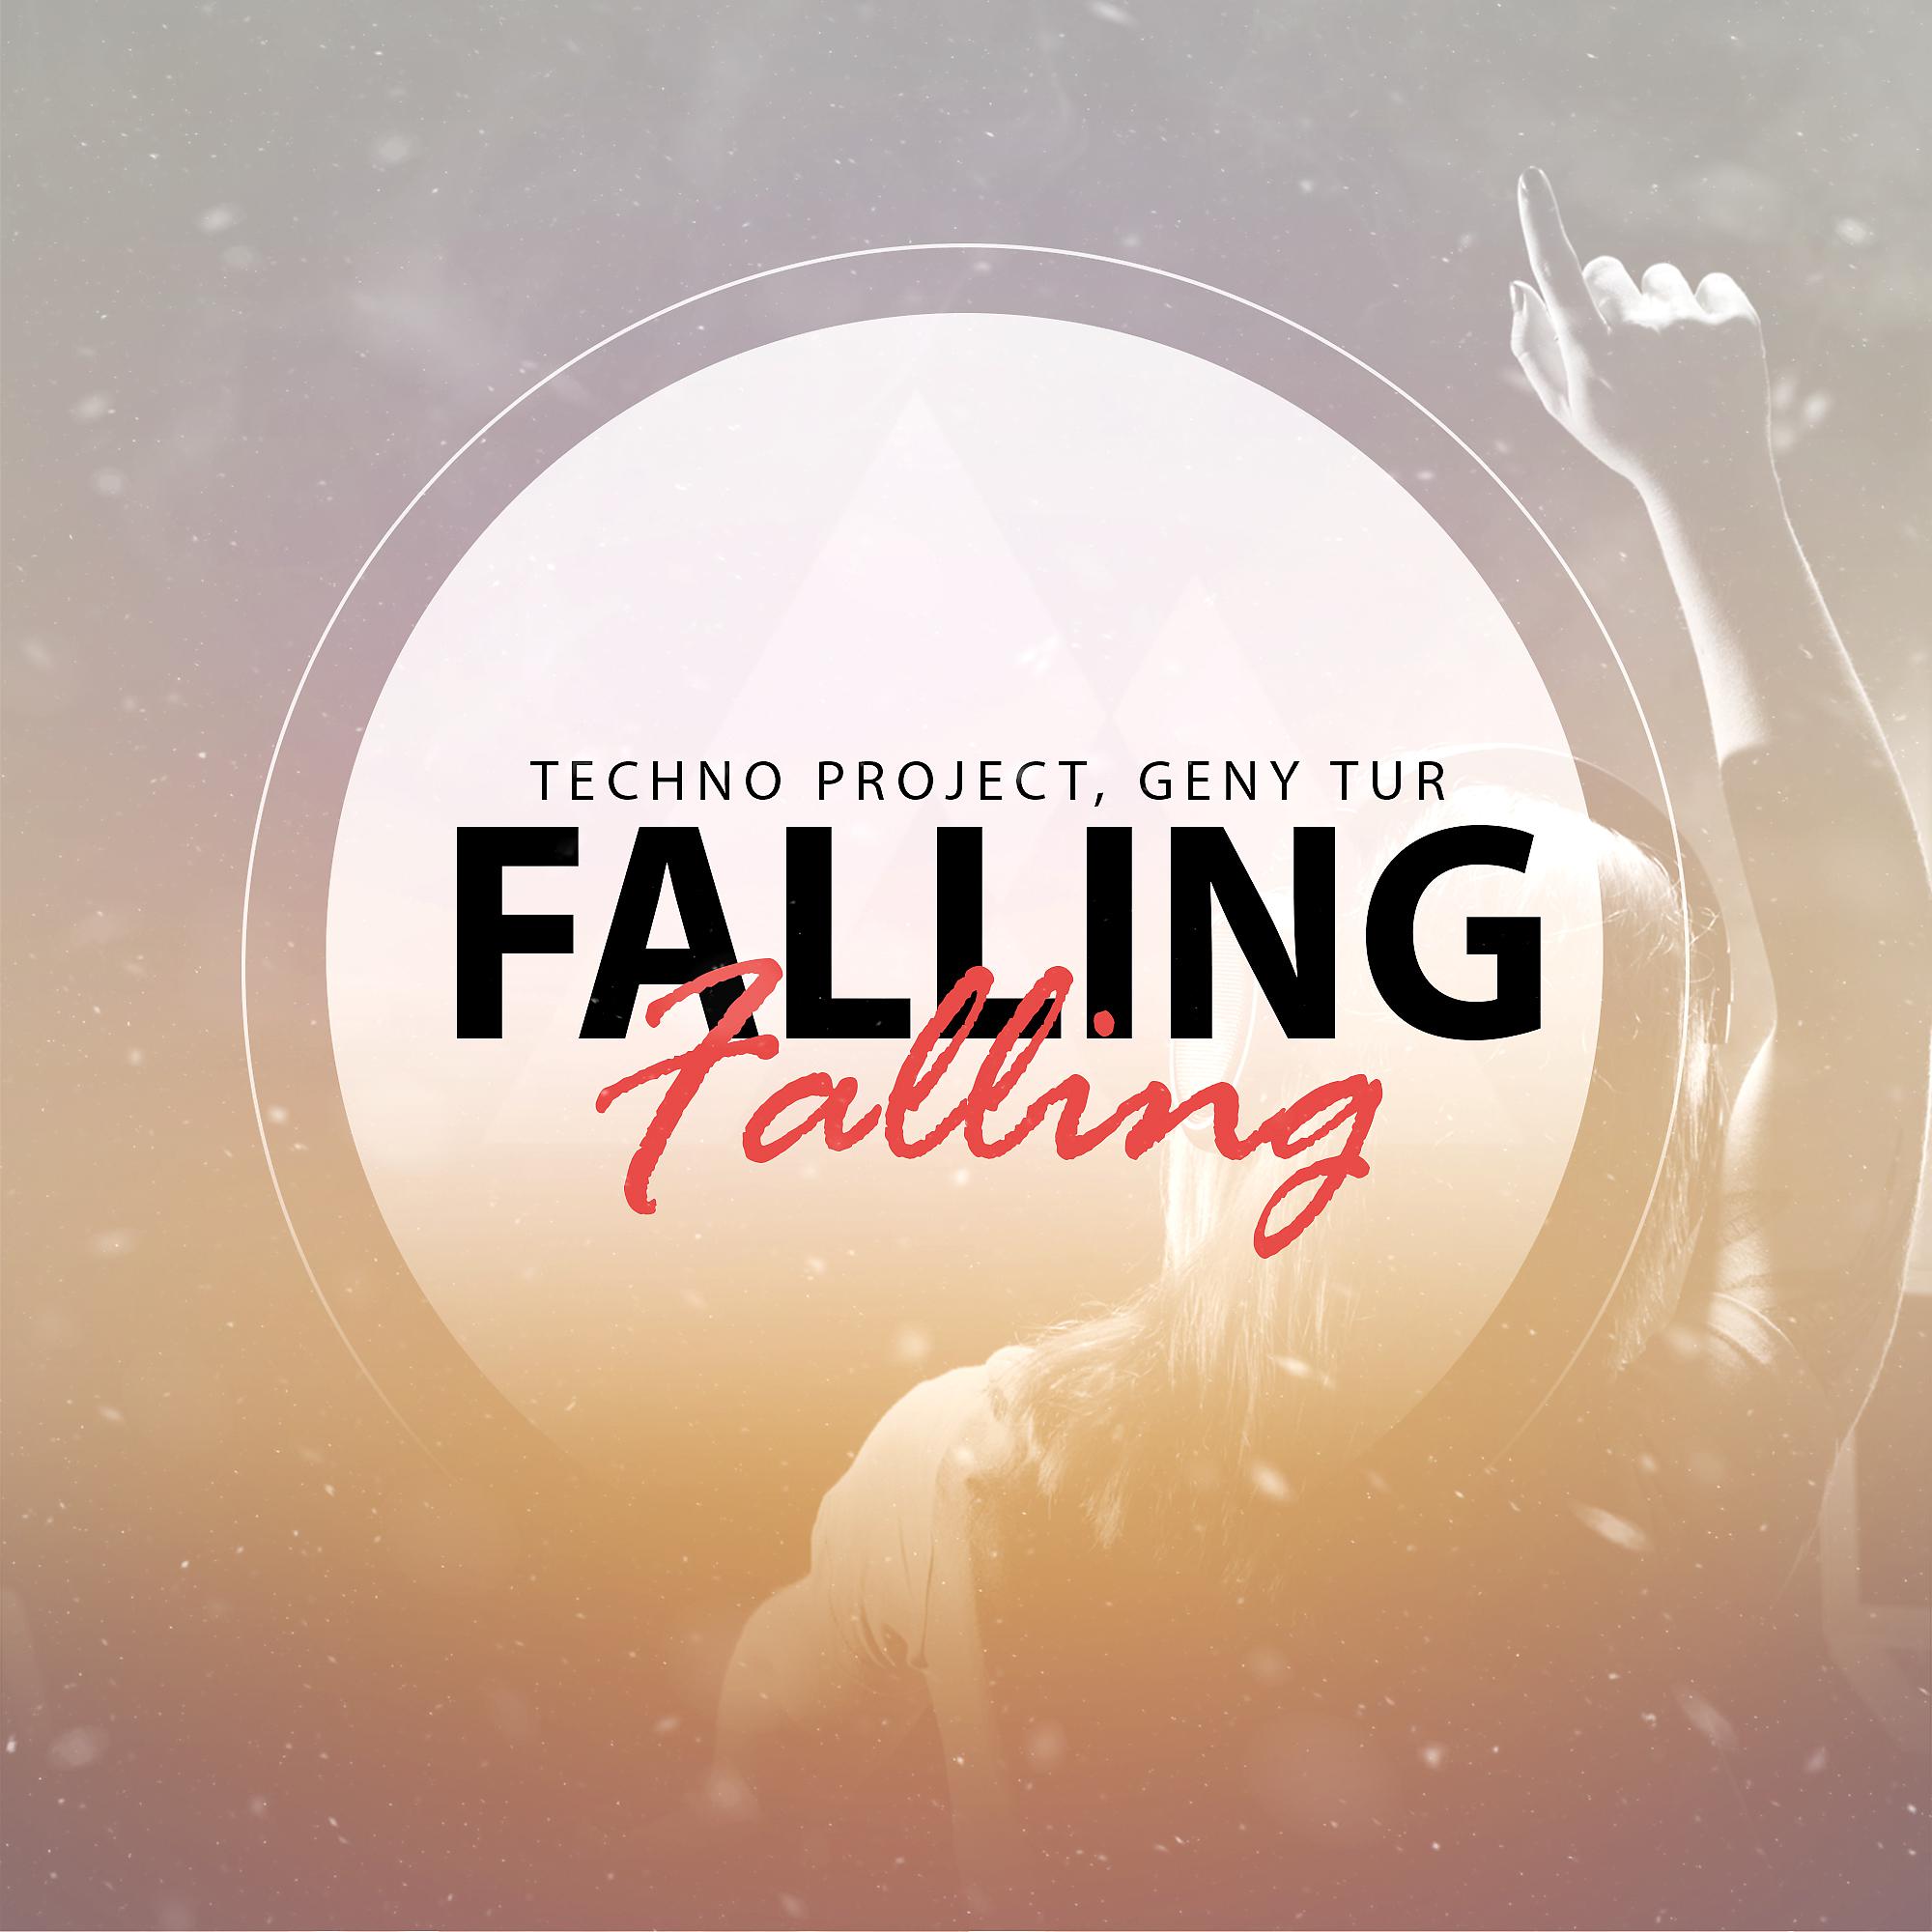 Techno project geny tur. Трек Falling Remix. Techno Project & Geny Tur - before (Dance). Techno Project, Geny Tur - last Forever.